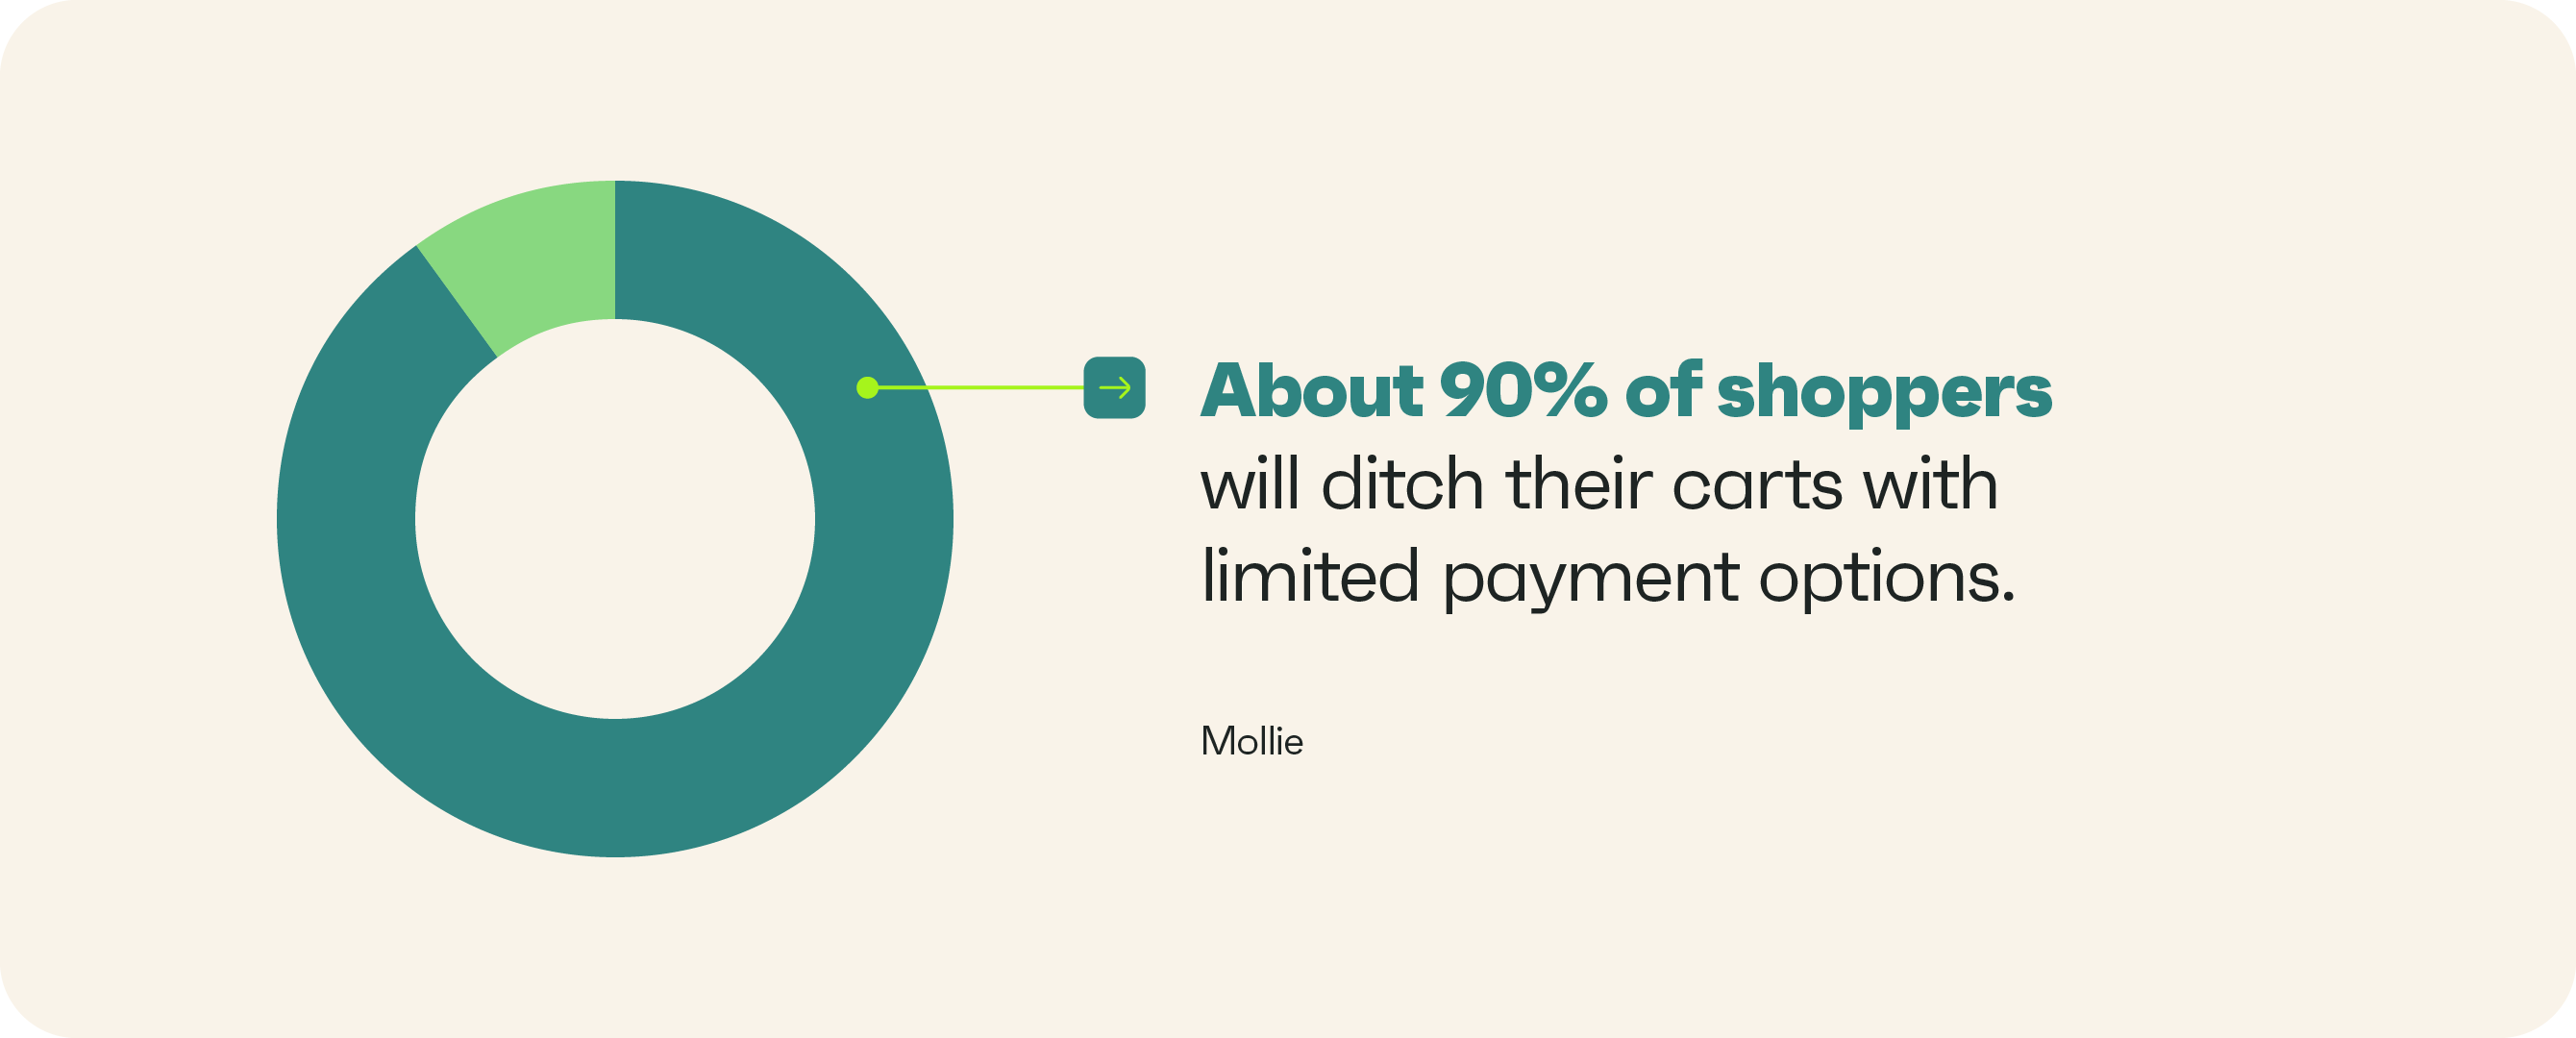 About 90% of shoppers will ditch their carts with limited payment options